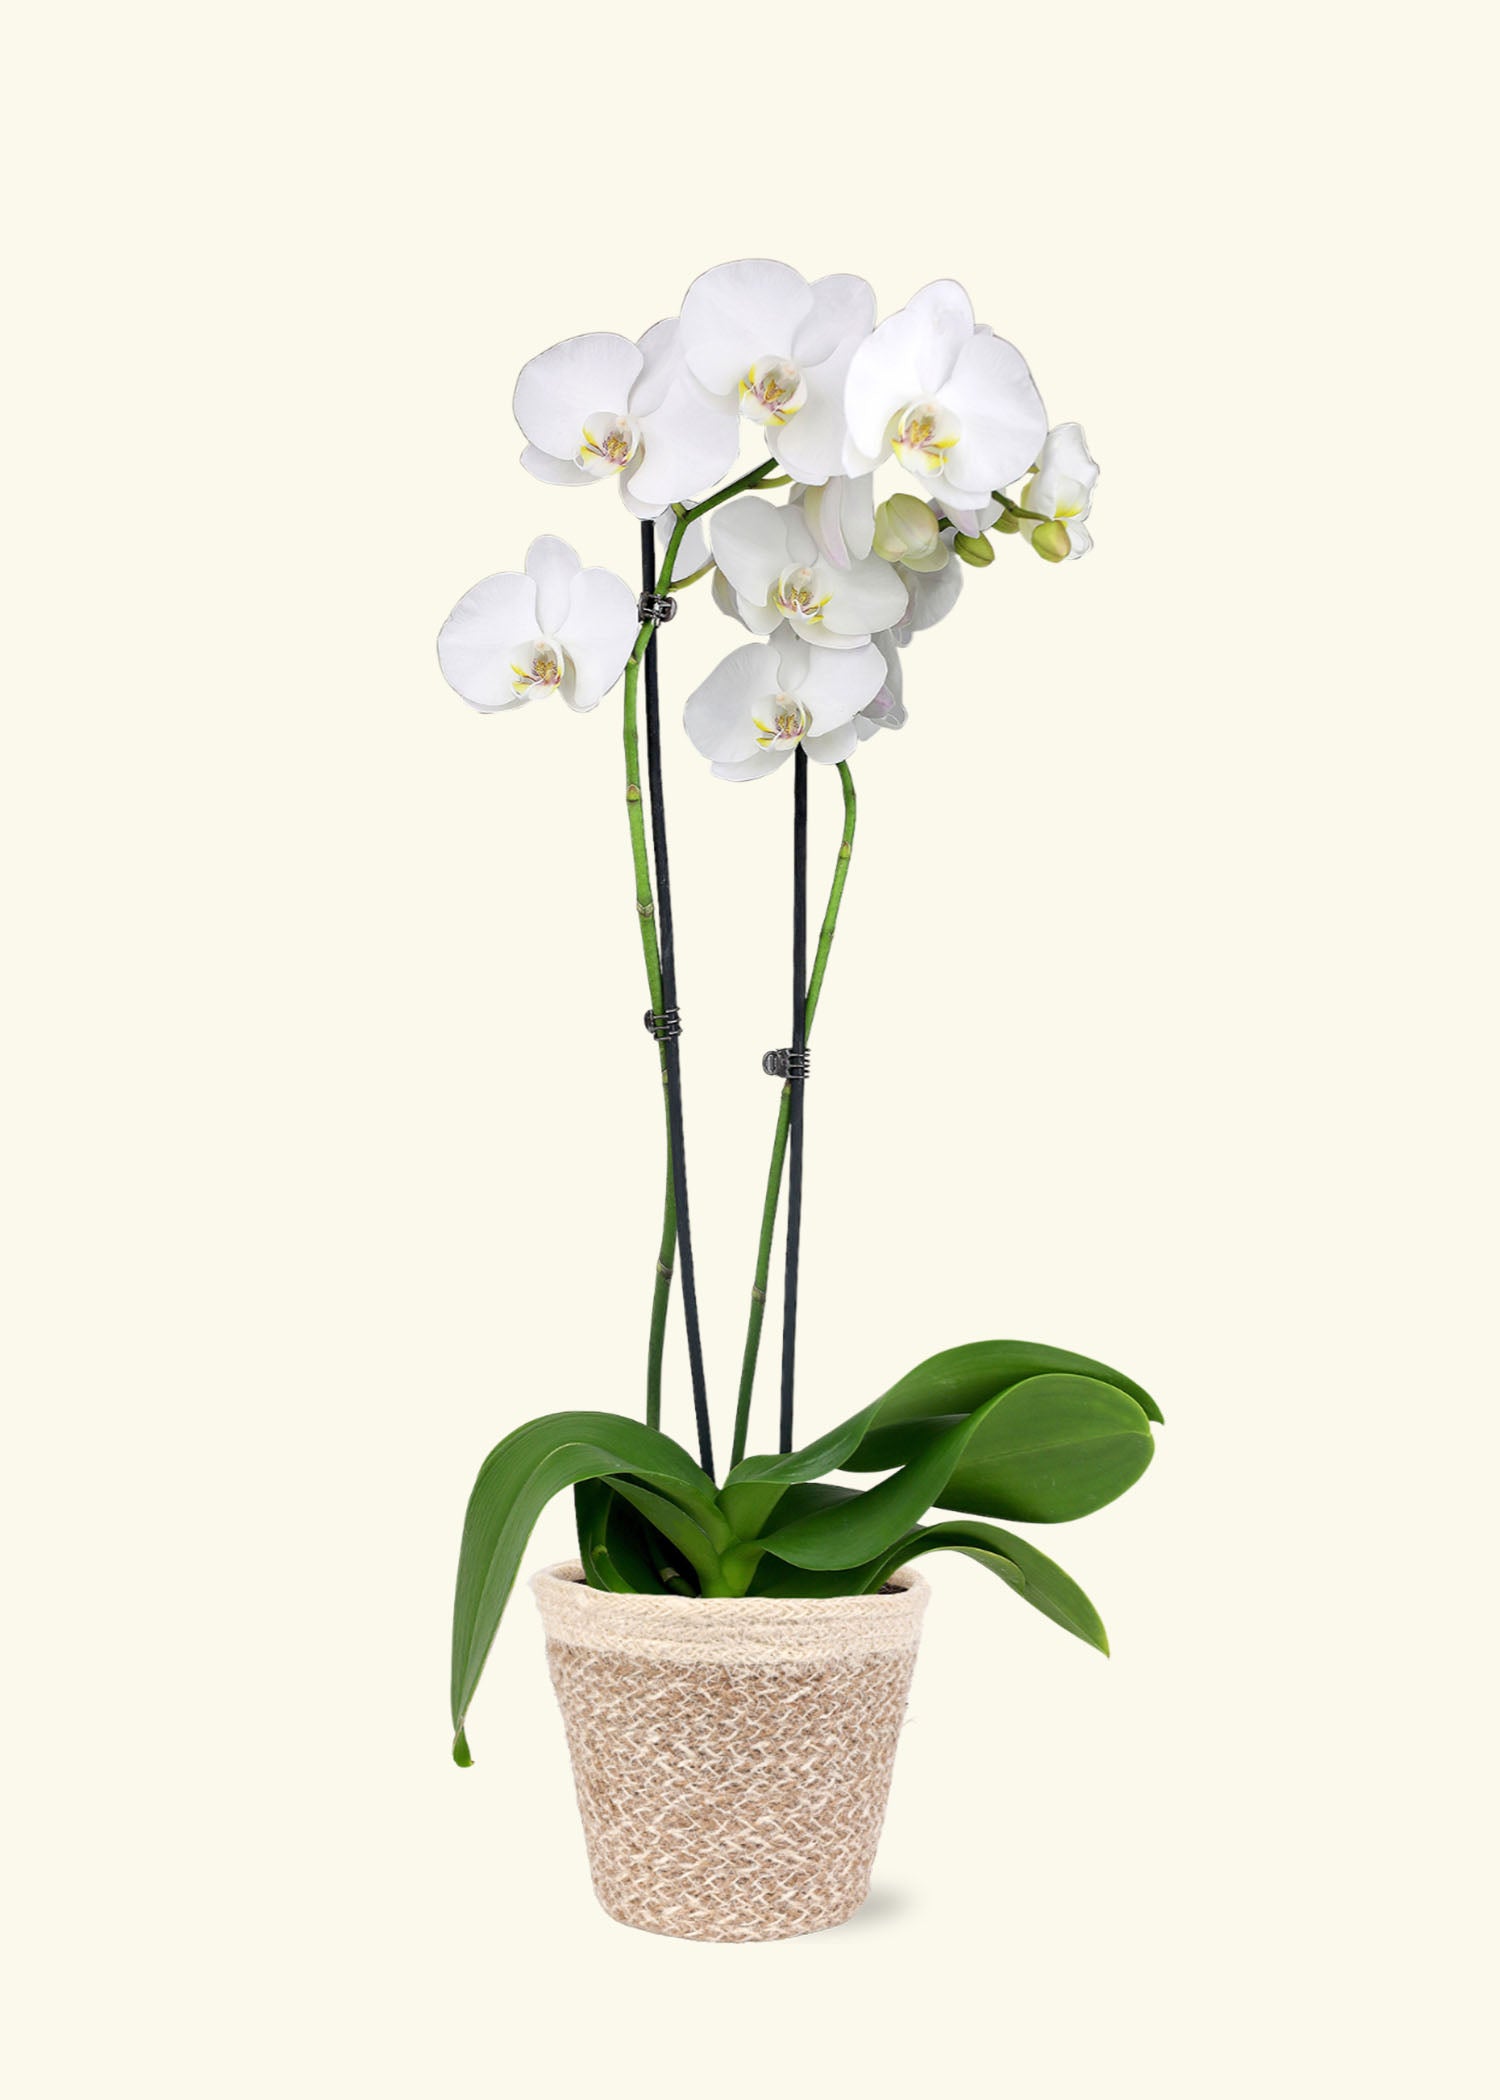 Small White Orchid in a cream ivo jute grow pot.